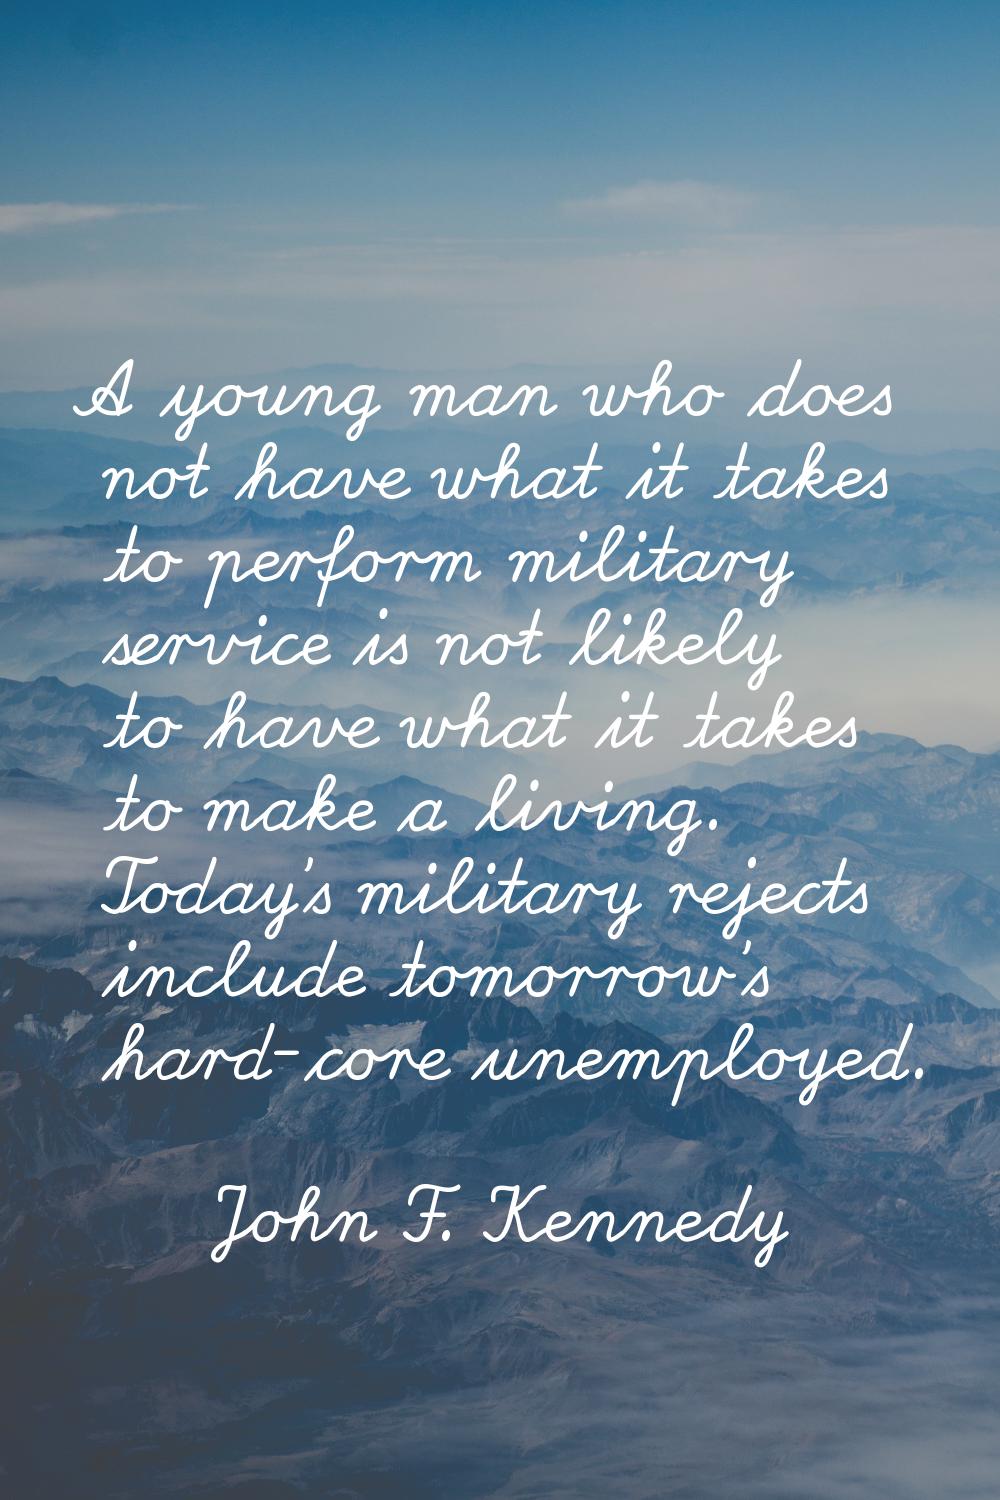 A young man who does not have what it takes to perform military service is not likely to have what 